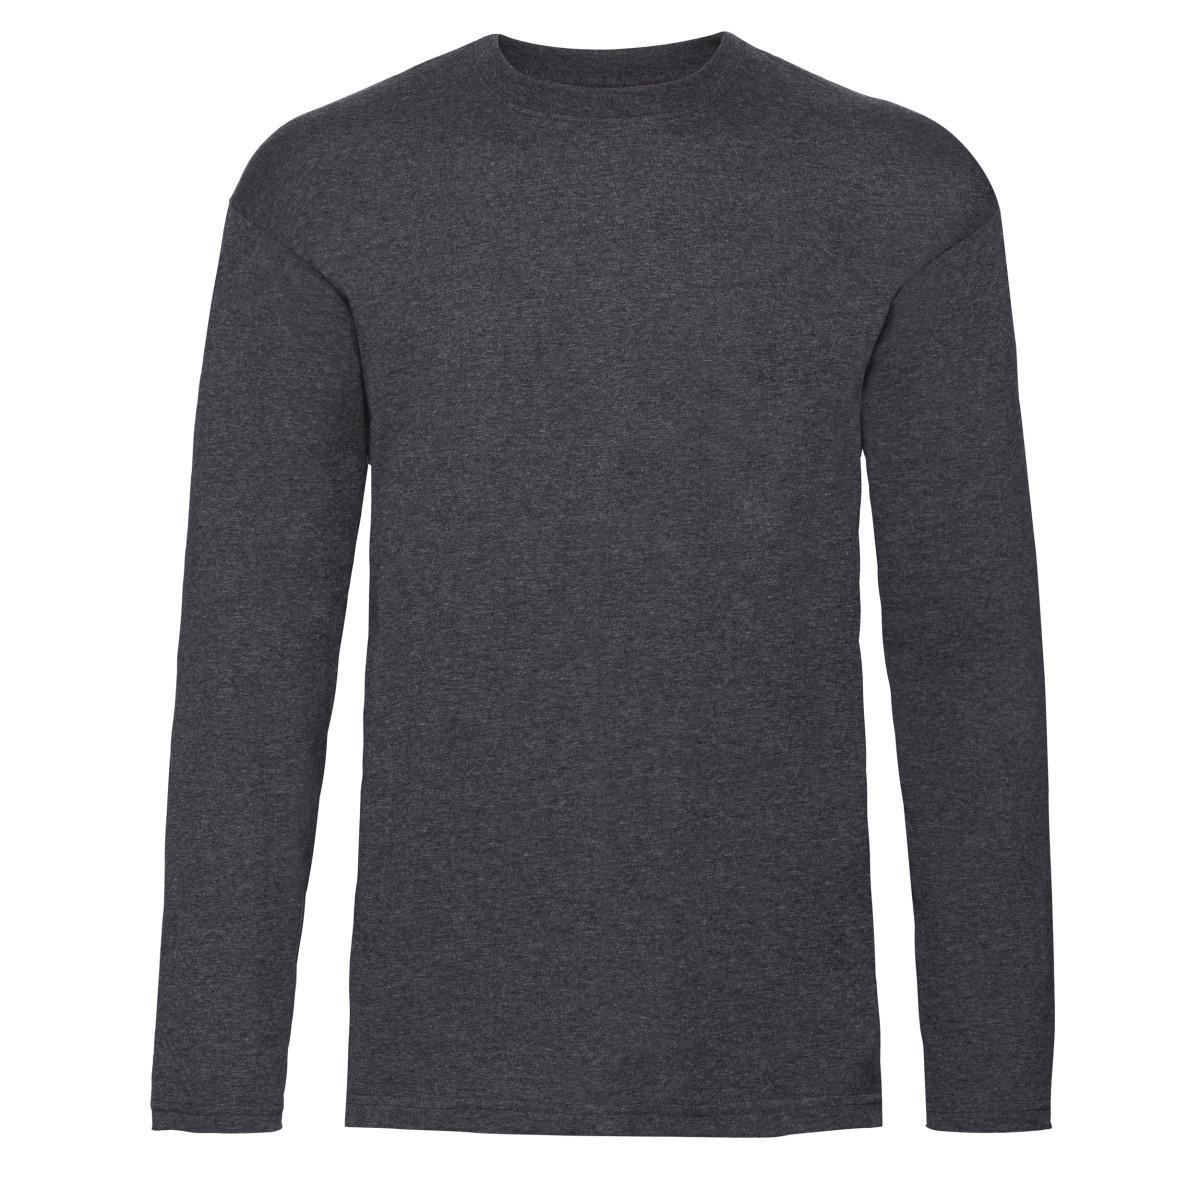 Fruit Of The Loom Mens Valueweight Crew Neck Long Sleeve T-Shirt (Dark Heather) (L)